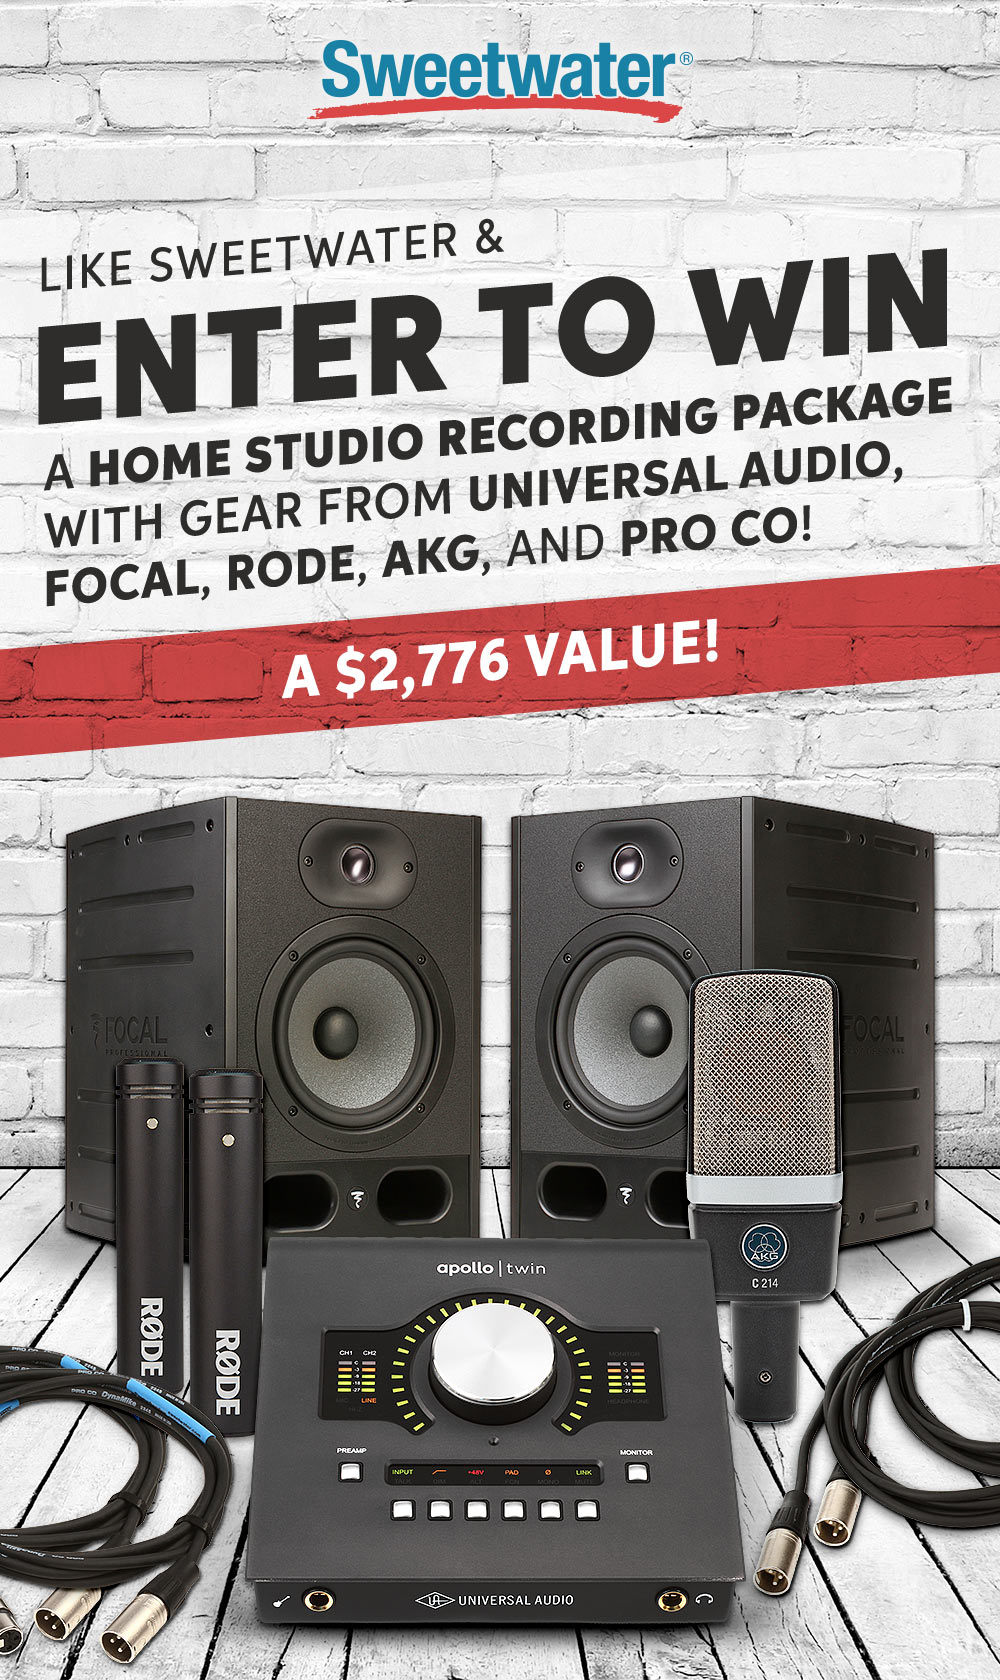 Sweetwater: Win a Home Studio Recording Package